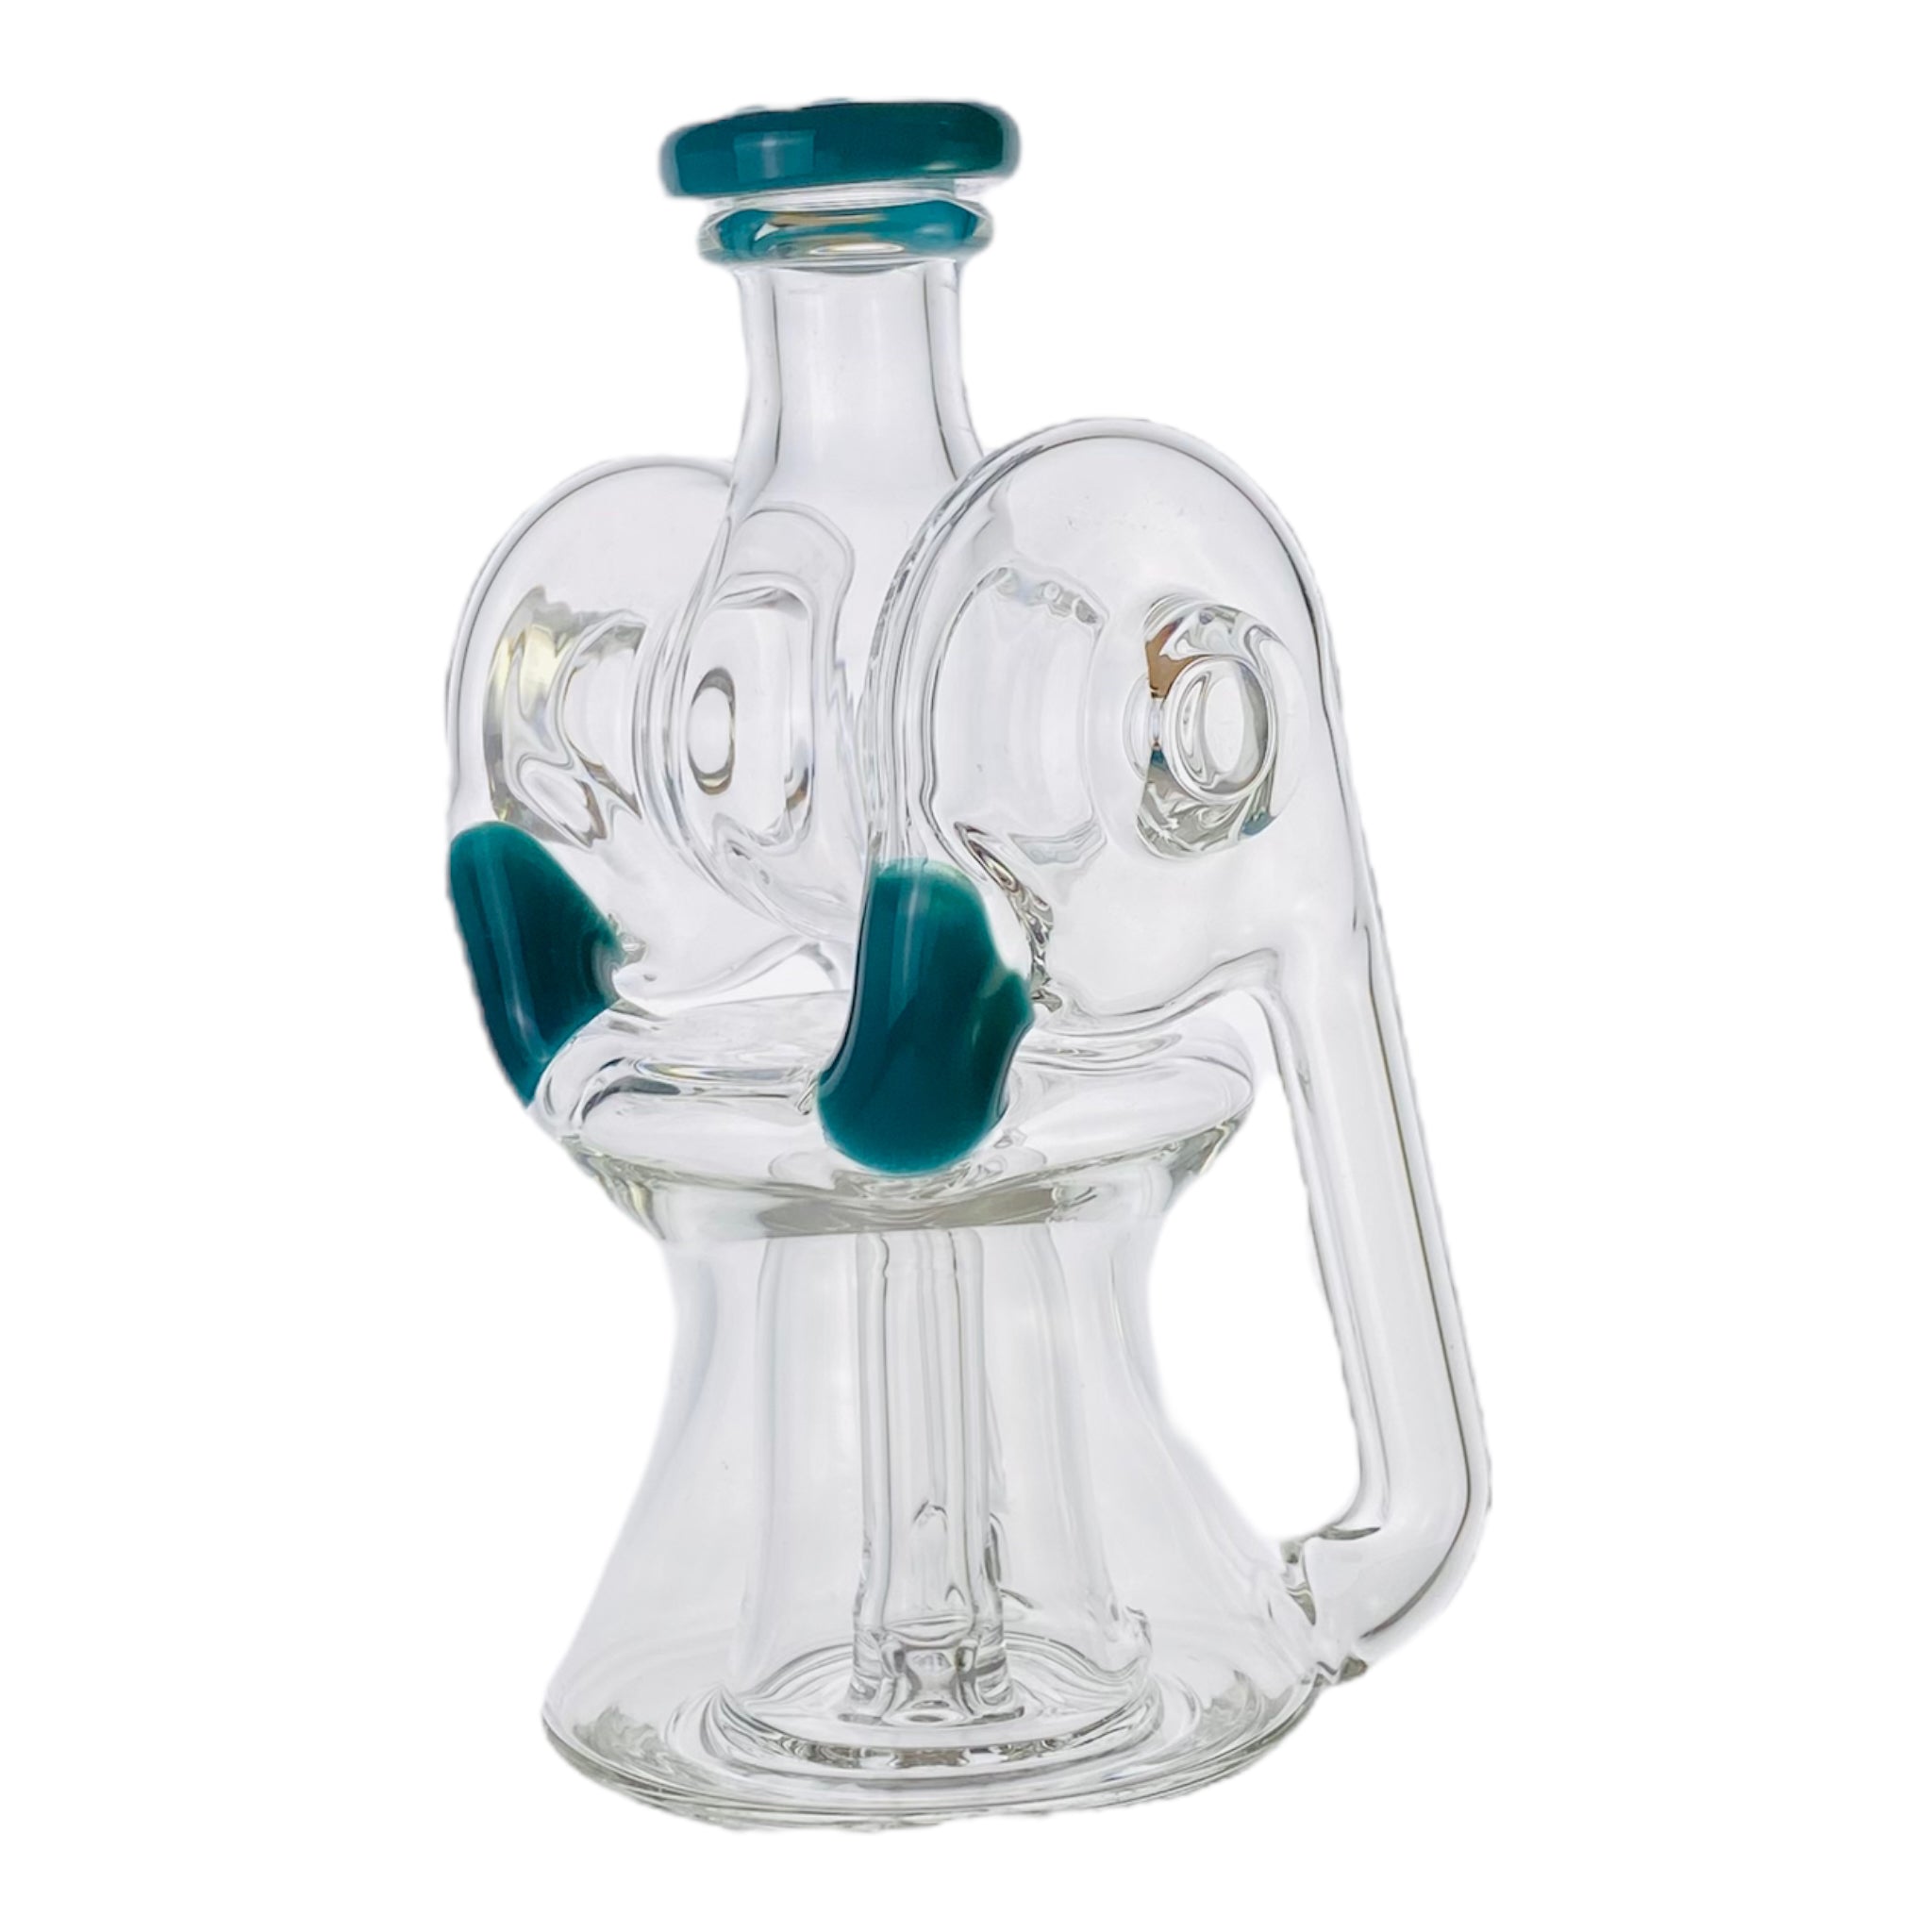 Ery Glass - Puffco Peak Glass Attachment - Double Uptake Recycler for sale mighty quinn santa rosa best peak top